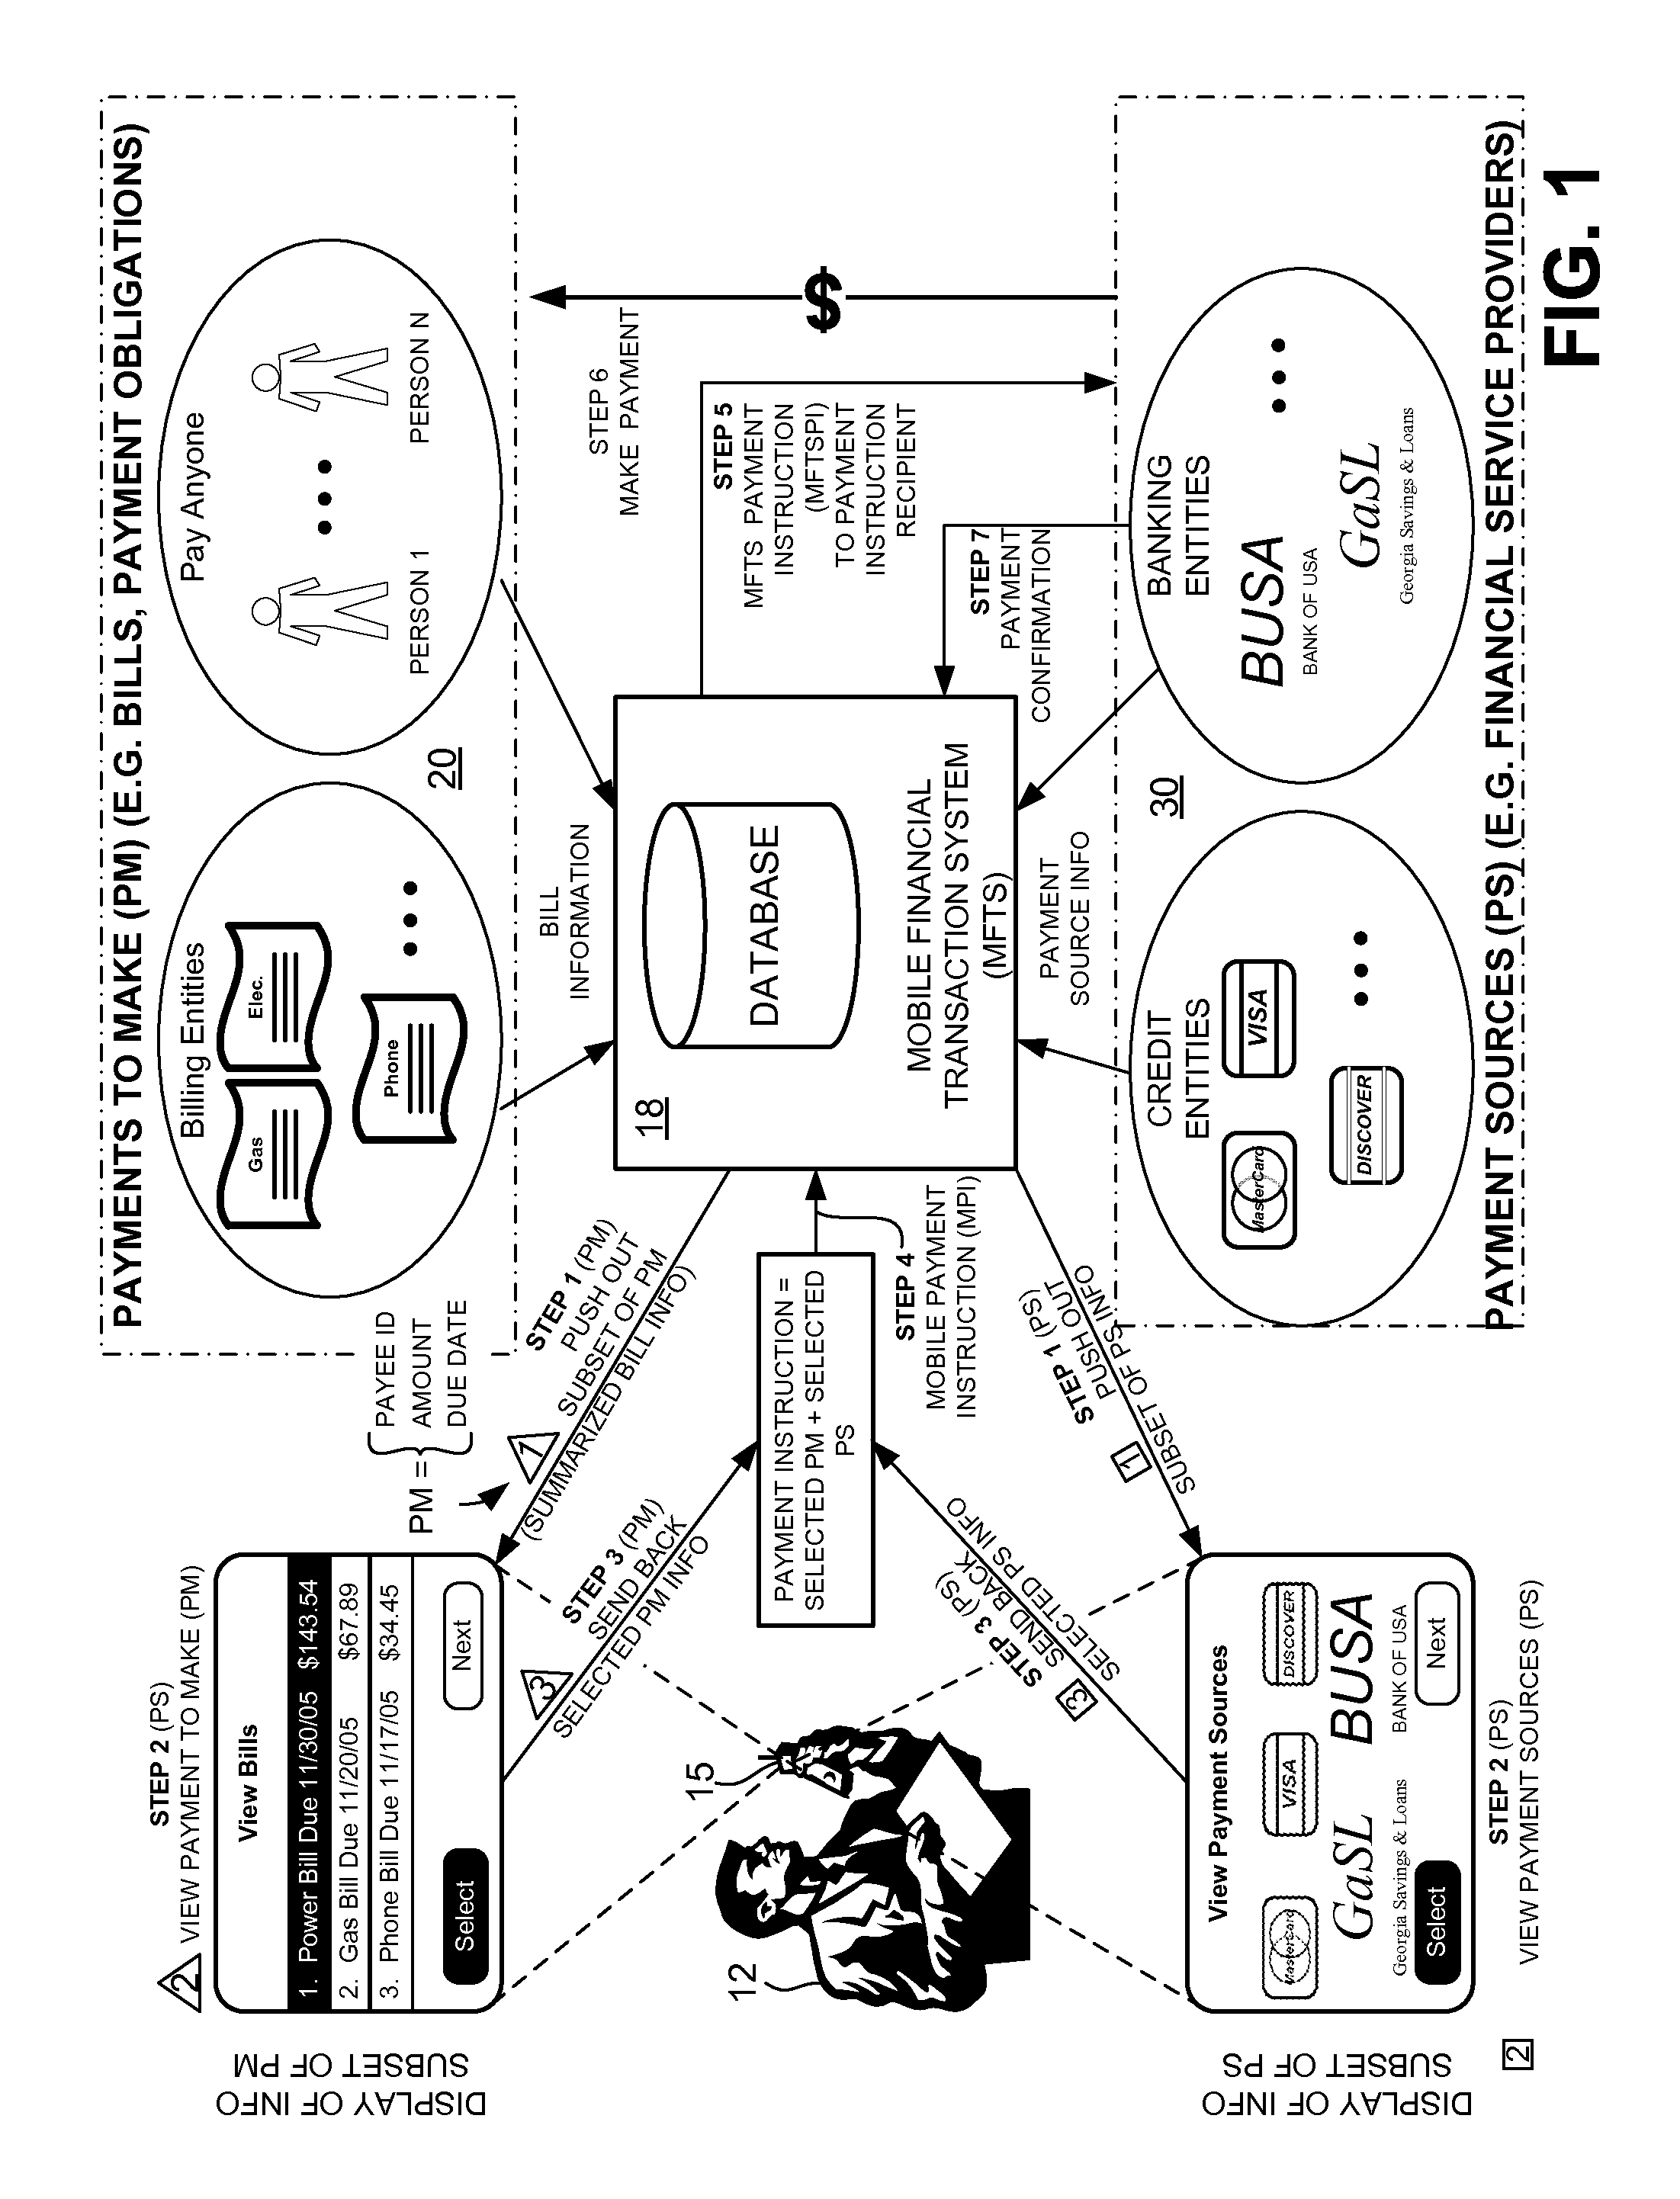 Methods and Systems For Making a Payment Via a Stored Value Card in a Mobile Environment